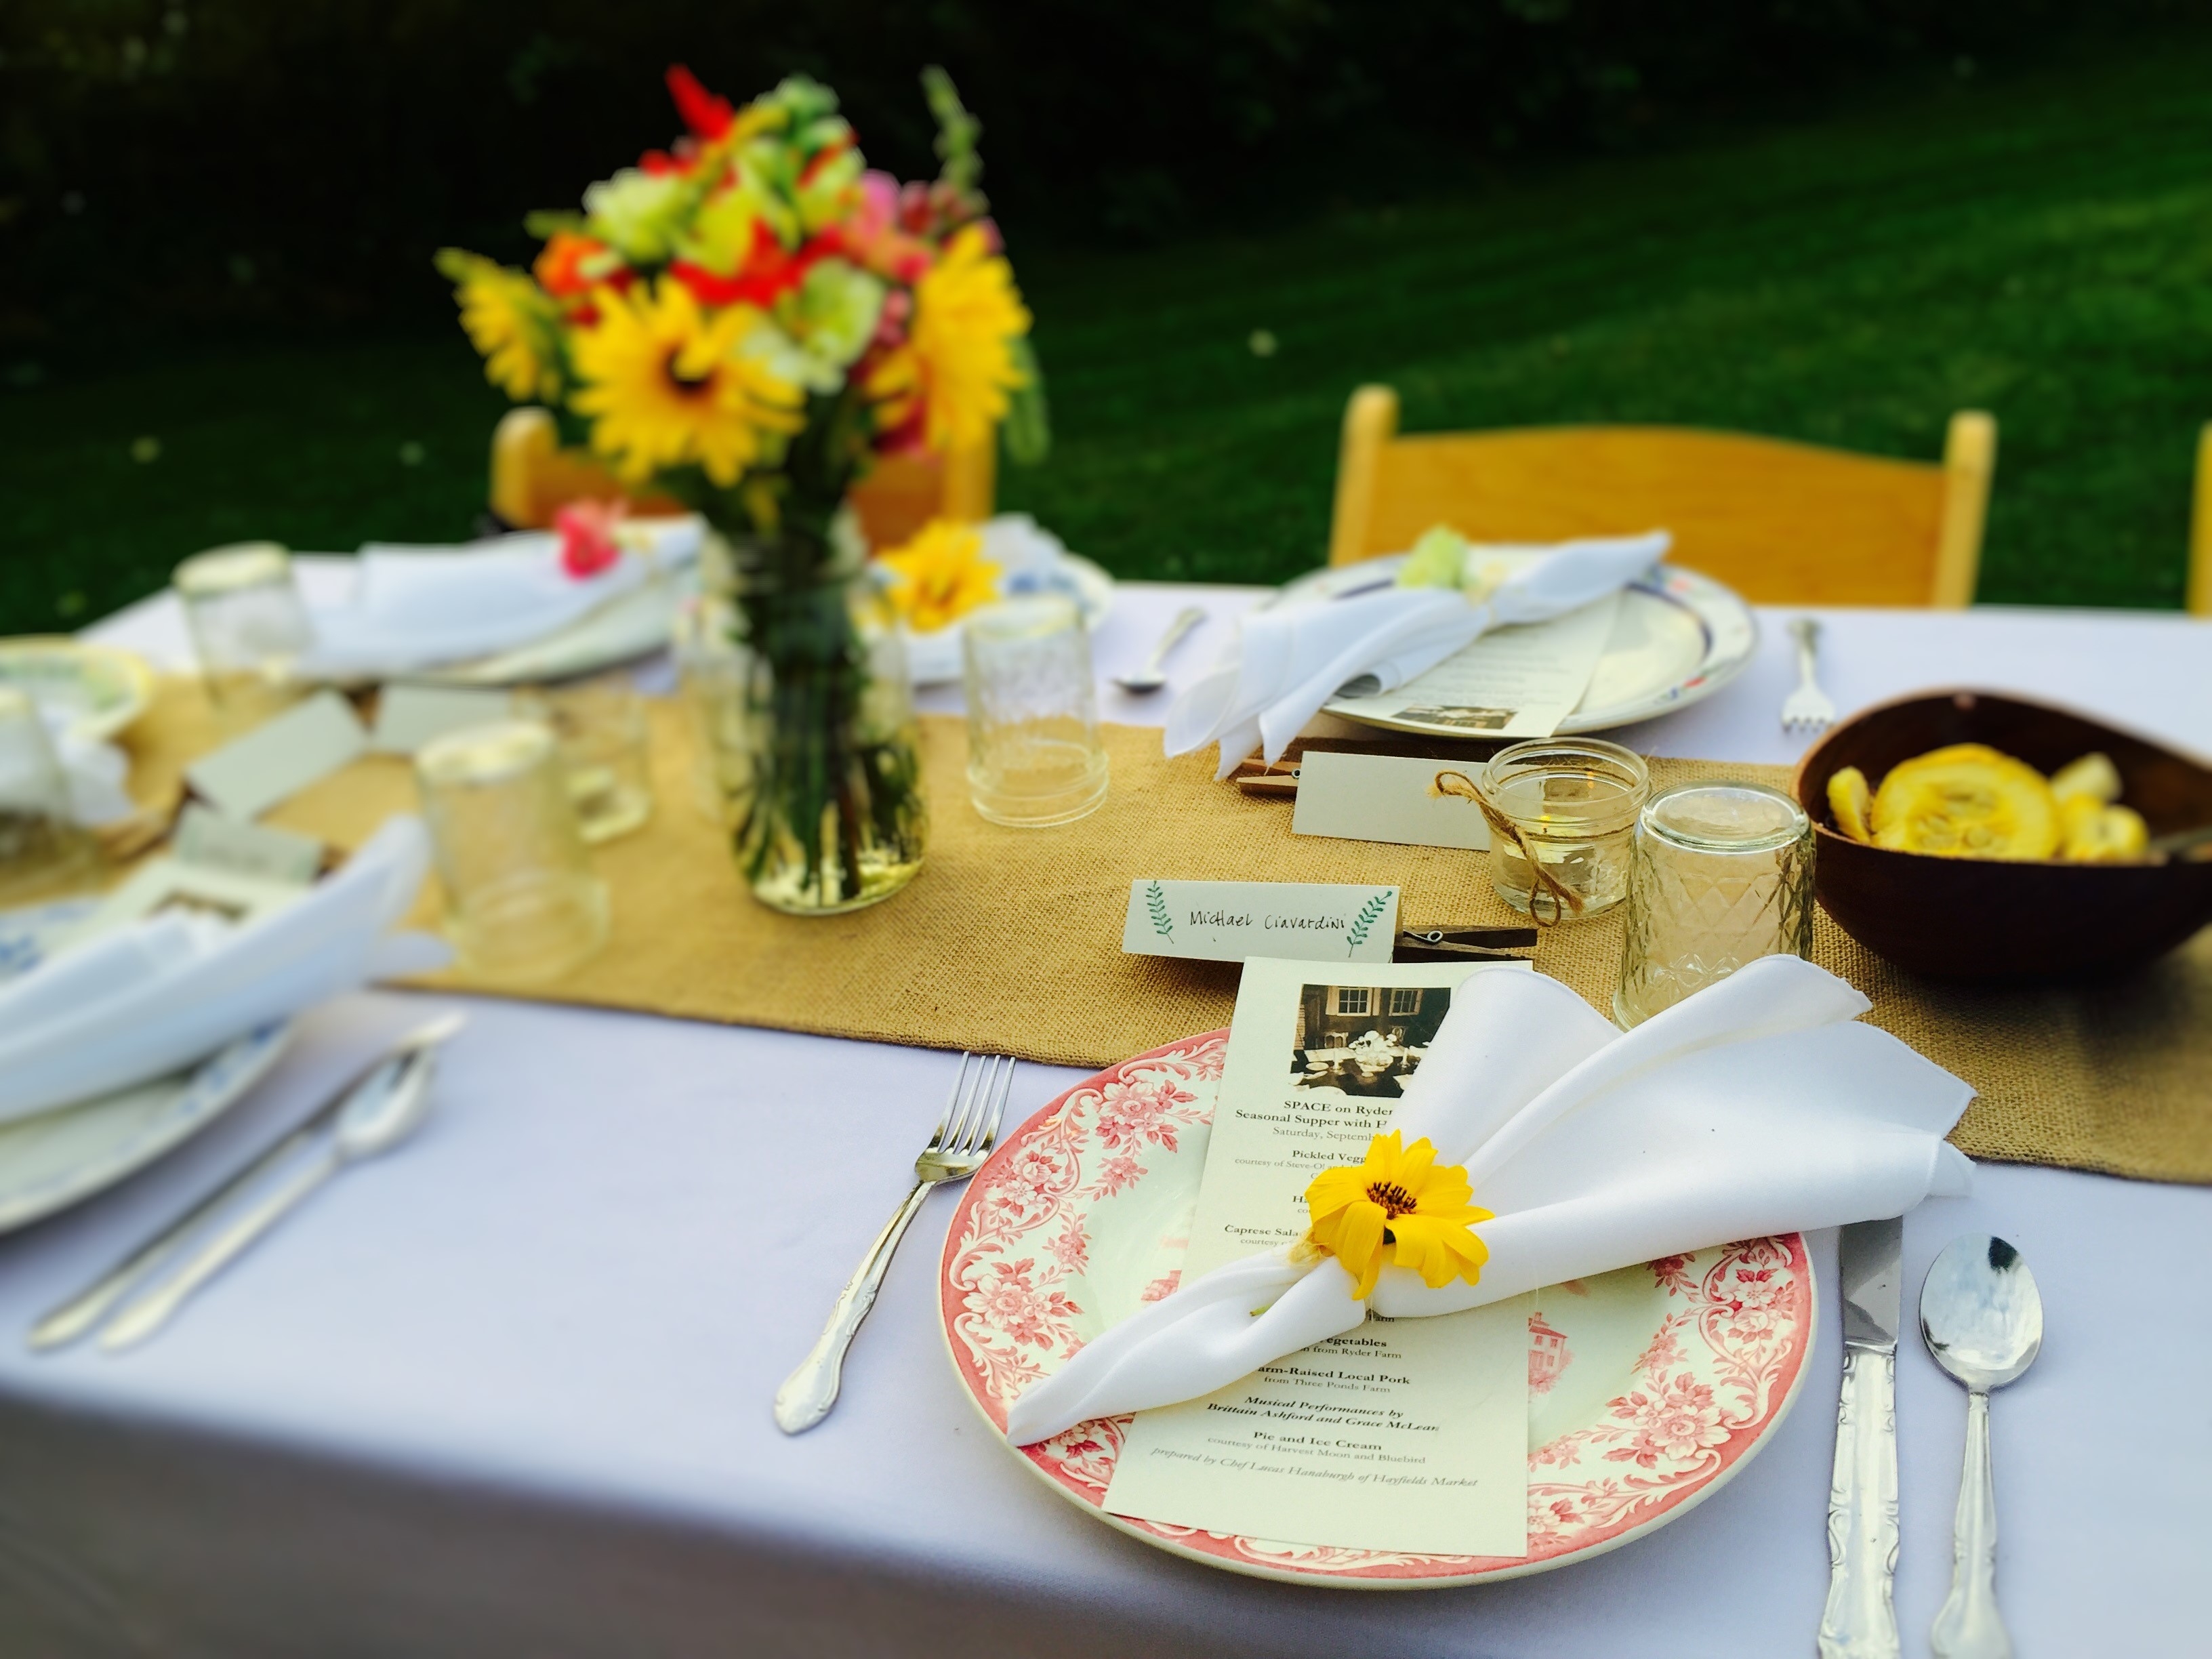 Place setting for a seasonal supper at Ryder Farm in Brewster, N.Y. Photo credit: M. Ciavardini